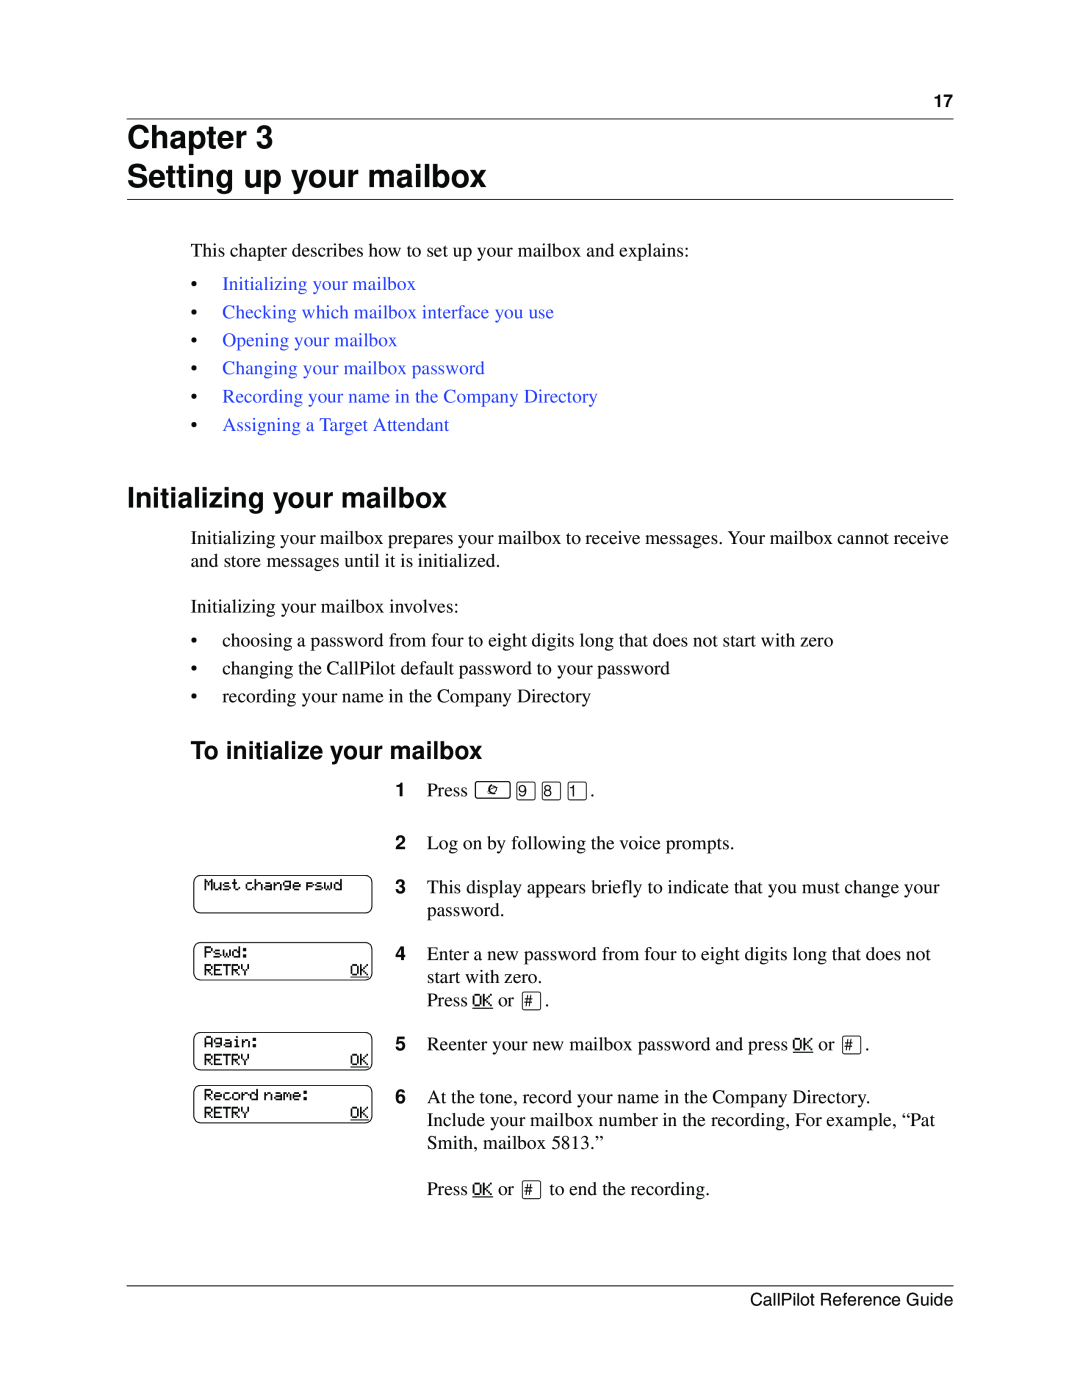 Nortel Networks CallPilot manual Chapter Setting up your mailbox, Initializing your mailbox, To initialize your mailbox 